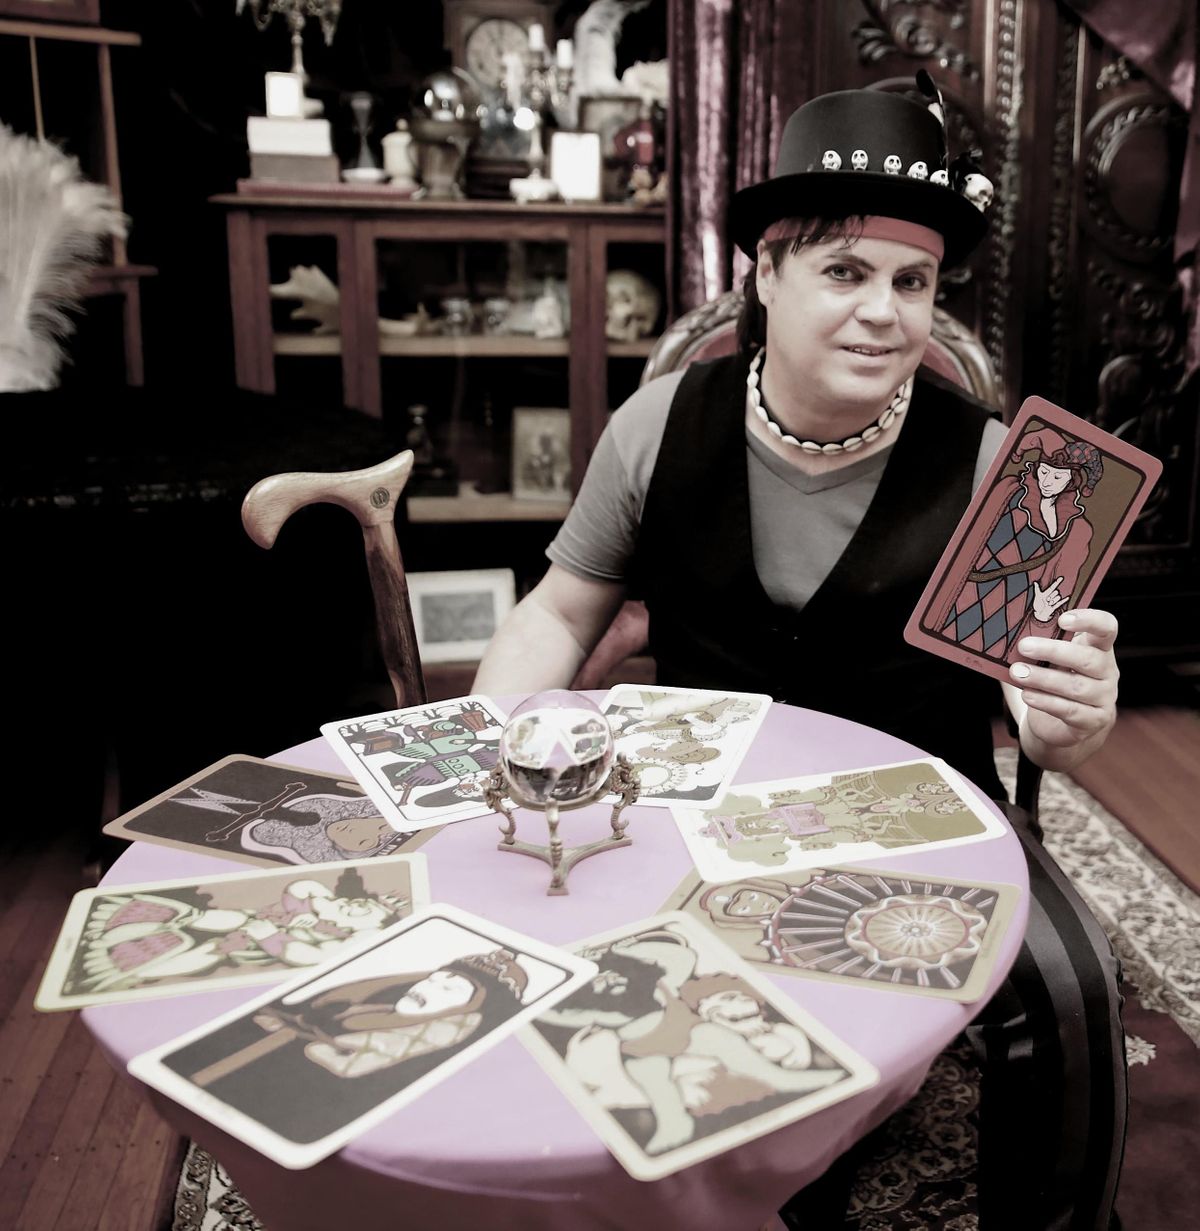 Wow! Free French Quarter Haunted Tour When You Come to This Tarot Party!